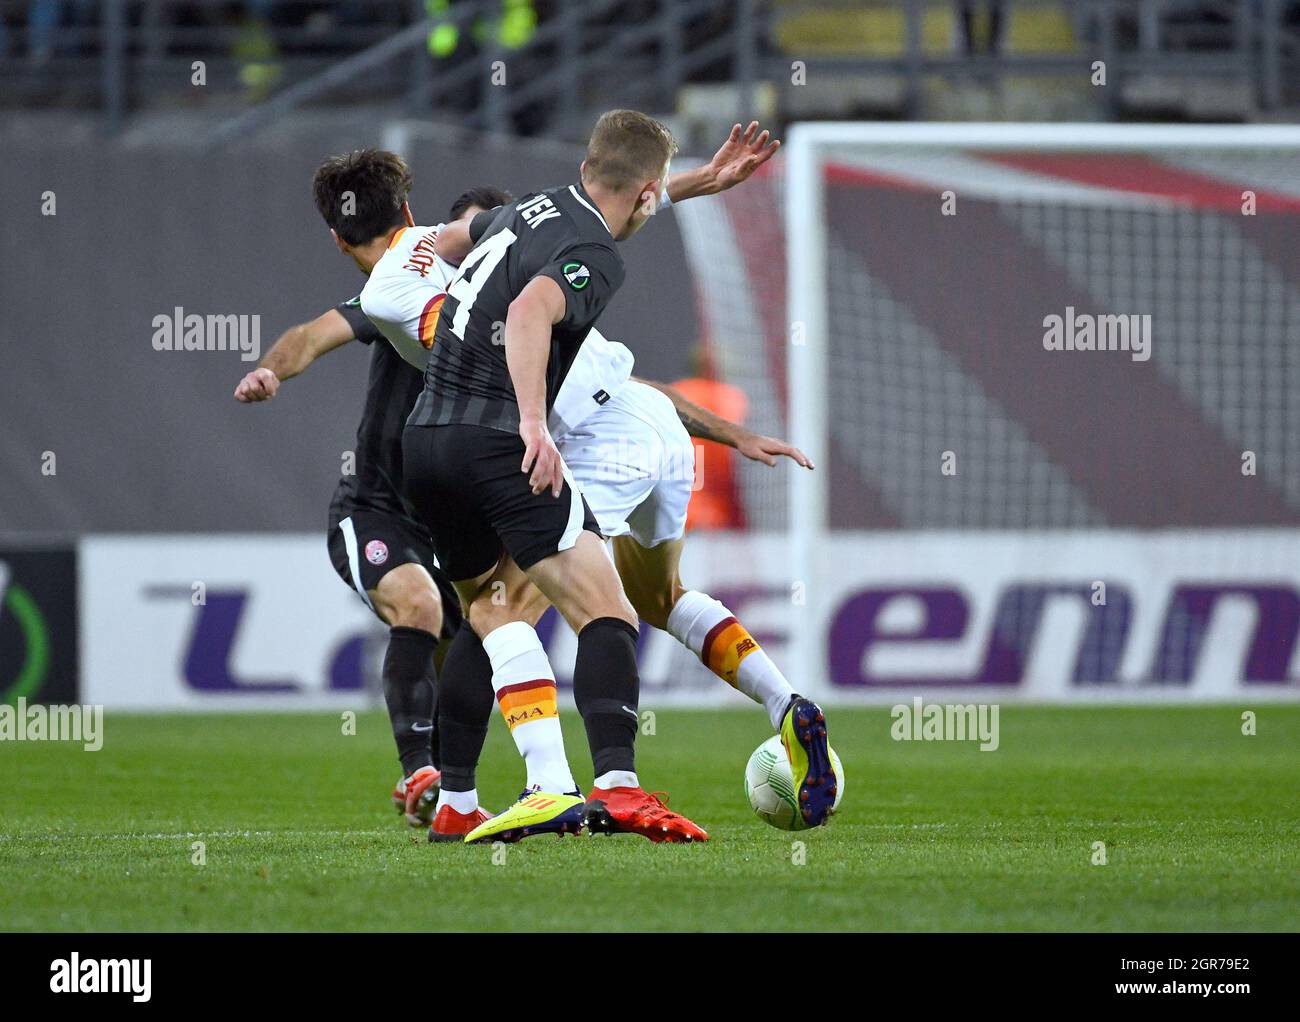 ZAPORIZHZHIA, UKRAINE - SEPTEMBER 30, 2021 - Players are seen in action during the UEFA Conference League round of 16 group stage game between AS Roma and FC Zorya Luhansk which ended with the defeat of the hosts 0:3, Zaporizhzhia, southeastern Ukraine Stock Photo